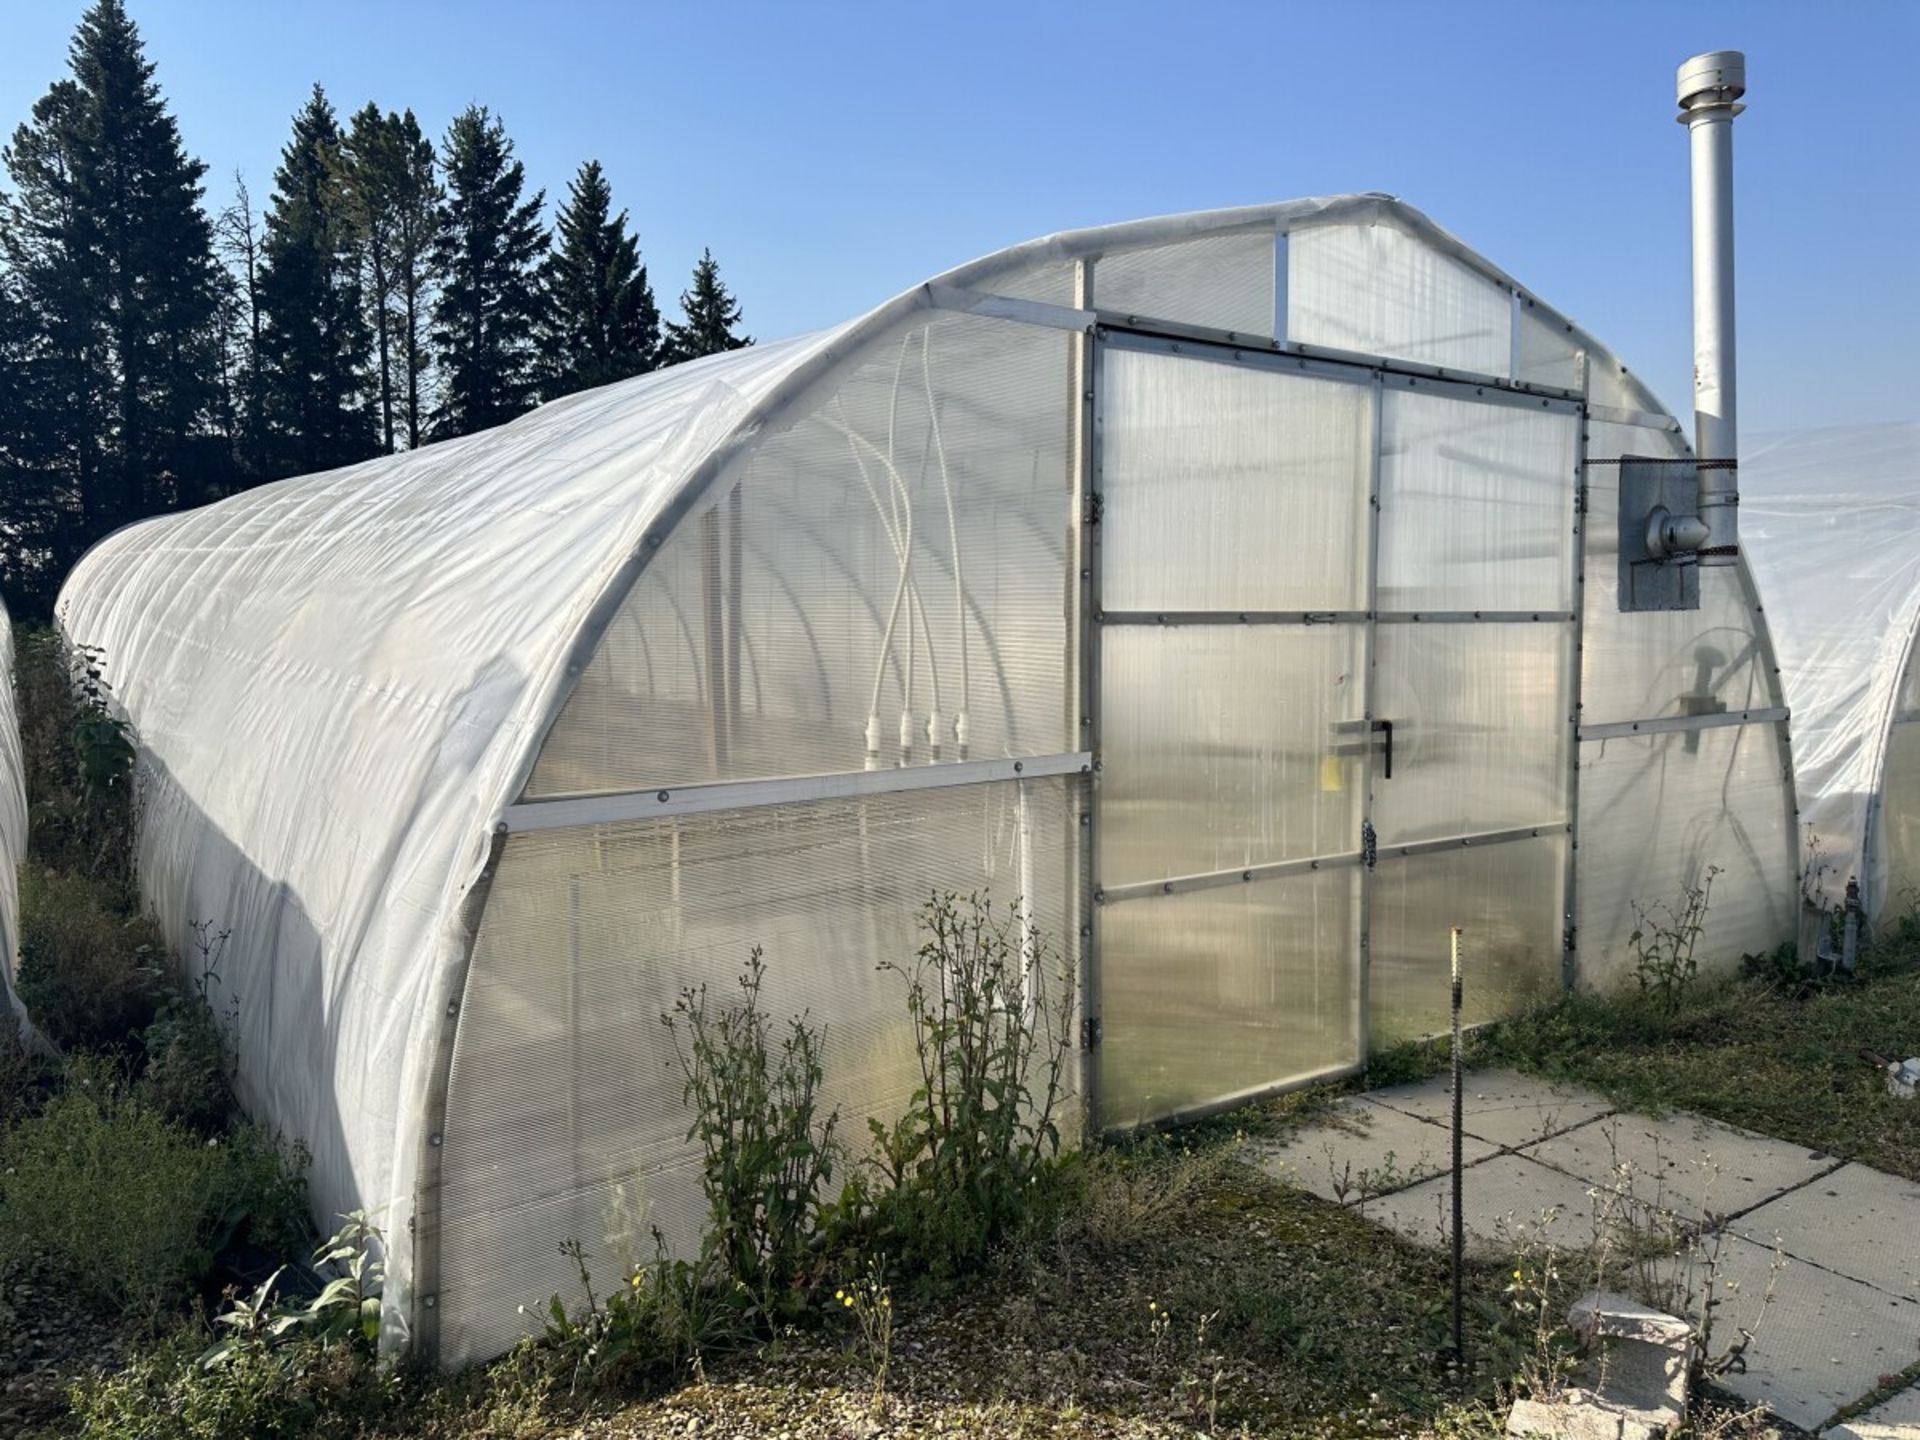 FREESTANDING COLD FRAME GREEN HOUSE W/ NG FURNACE 20FT X 100FT, DRIP IRRIGATION, ETC. - Image 2 of 16